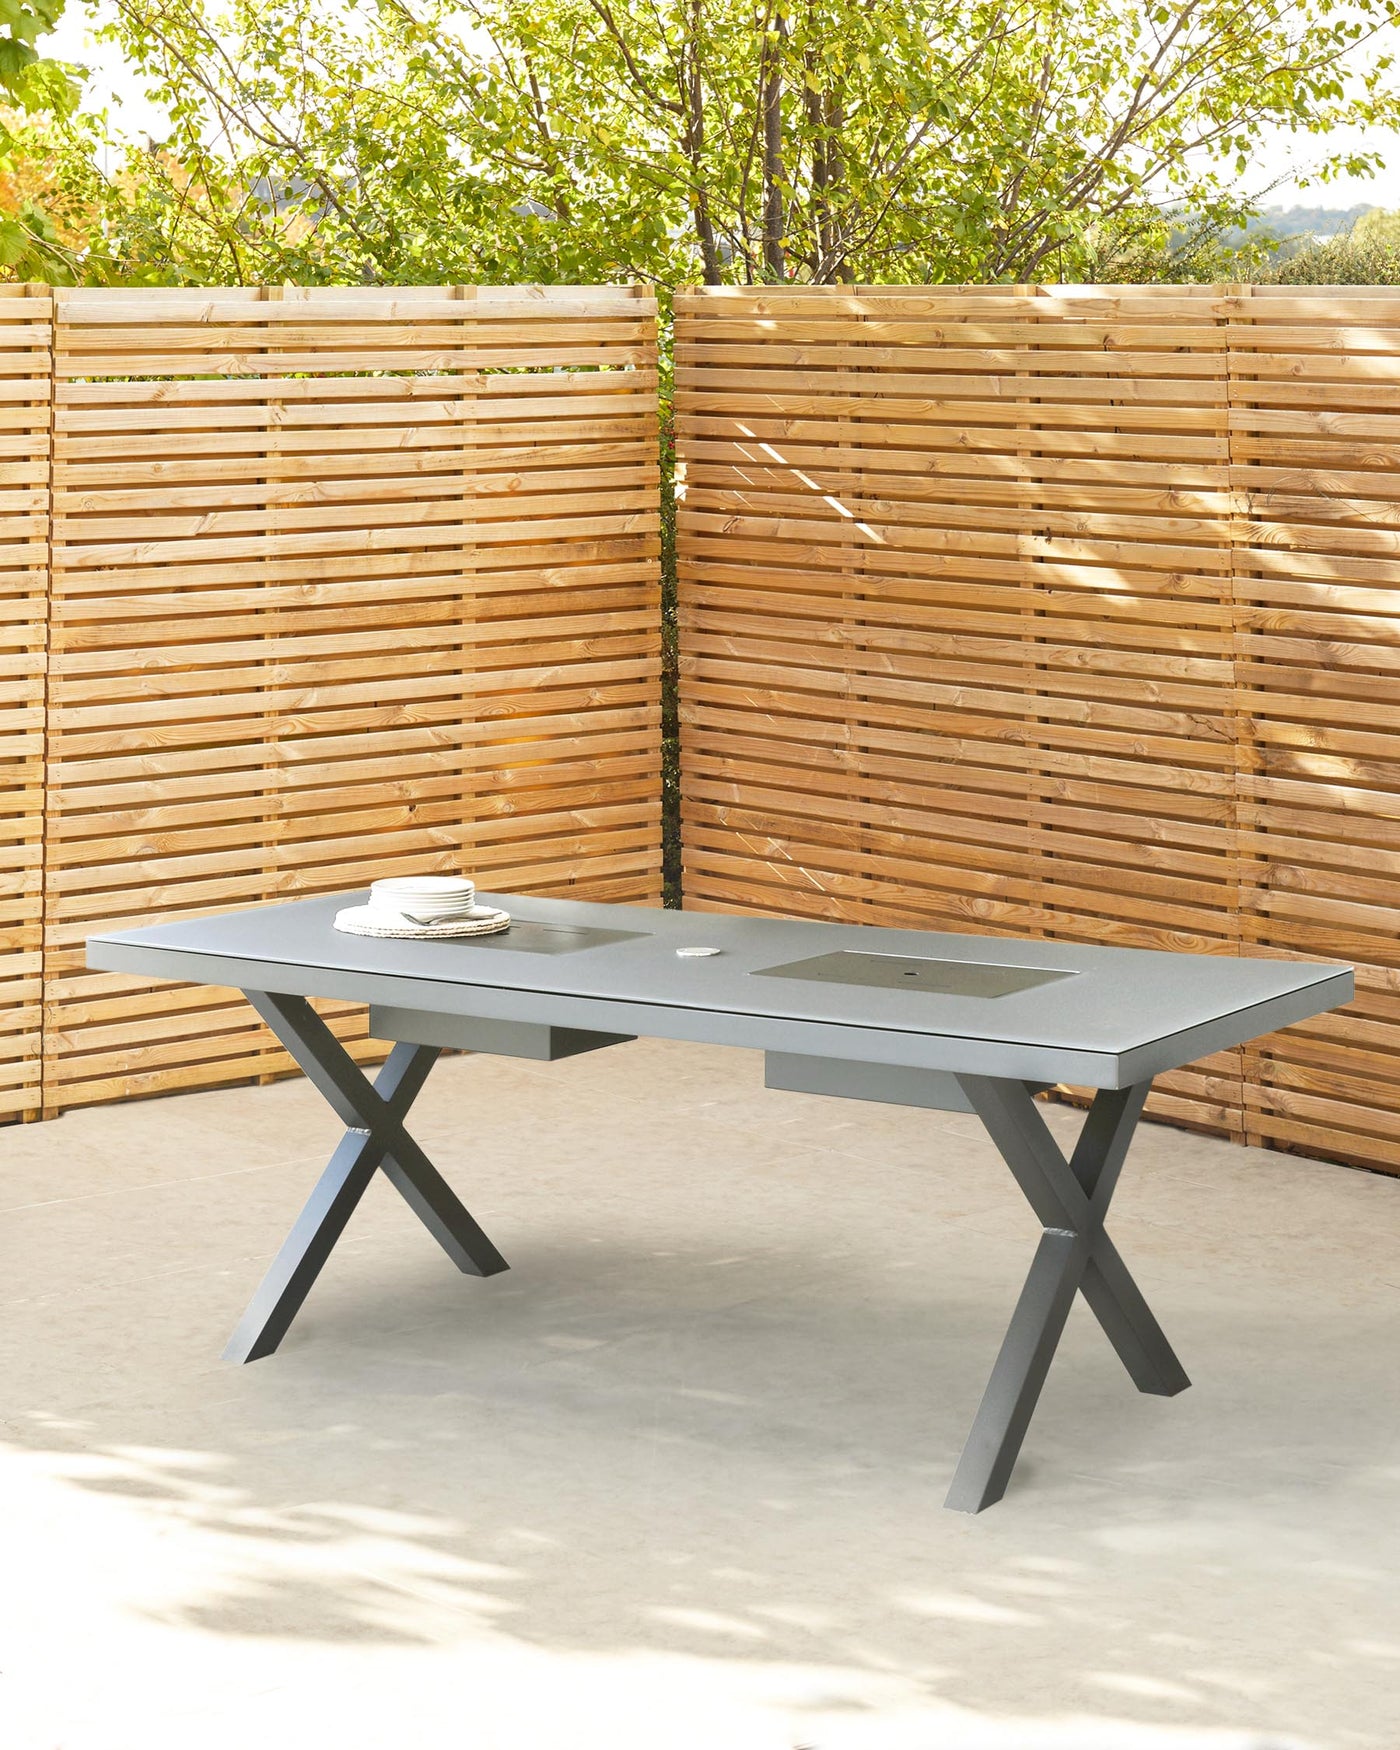 Modern outdoor dining table in a slate grey finish, featuring a spacious rectangular top with a central cut-out design, supported by distinctive crisscross legs.